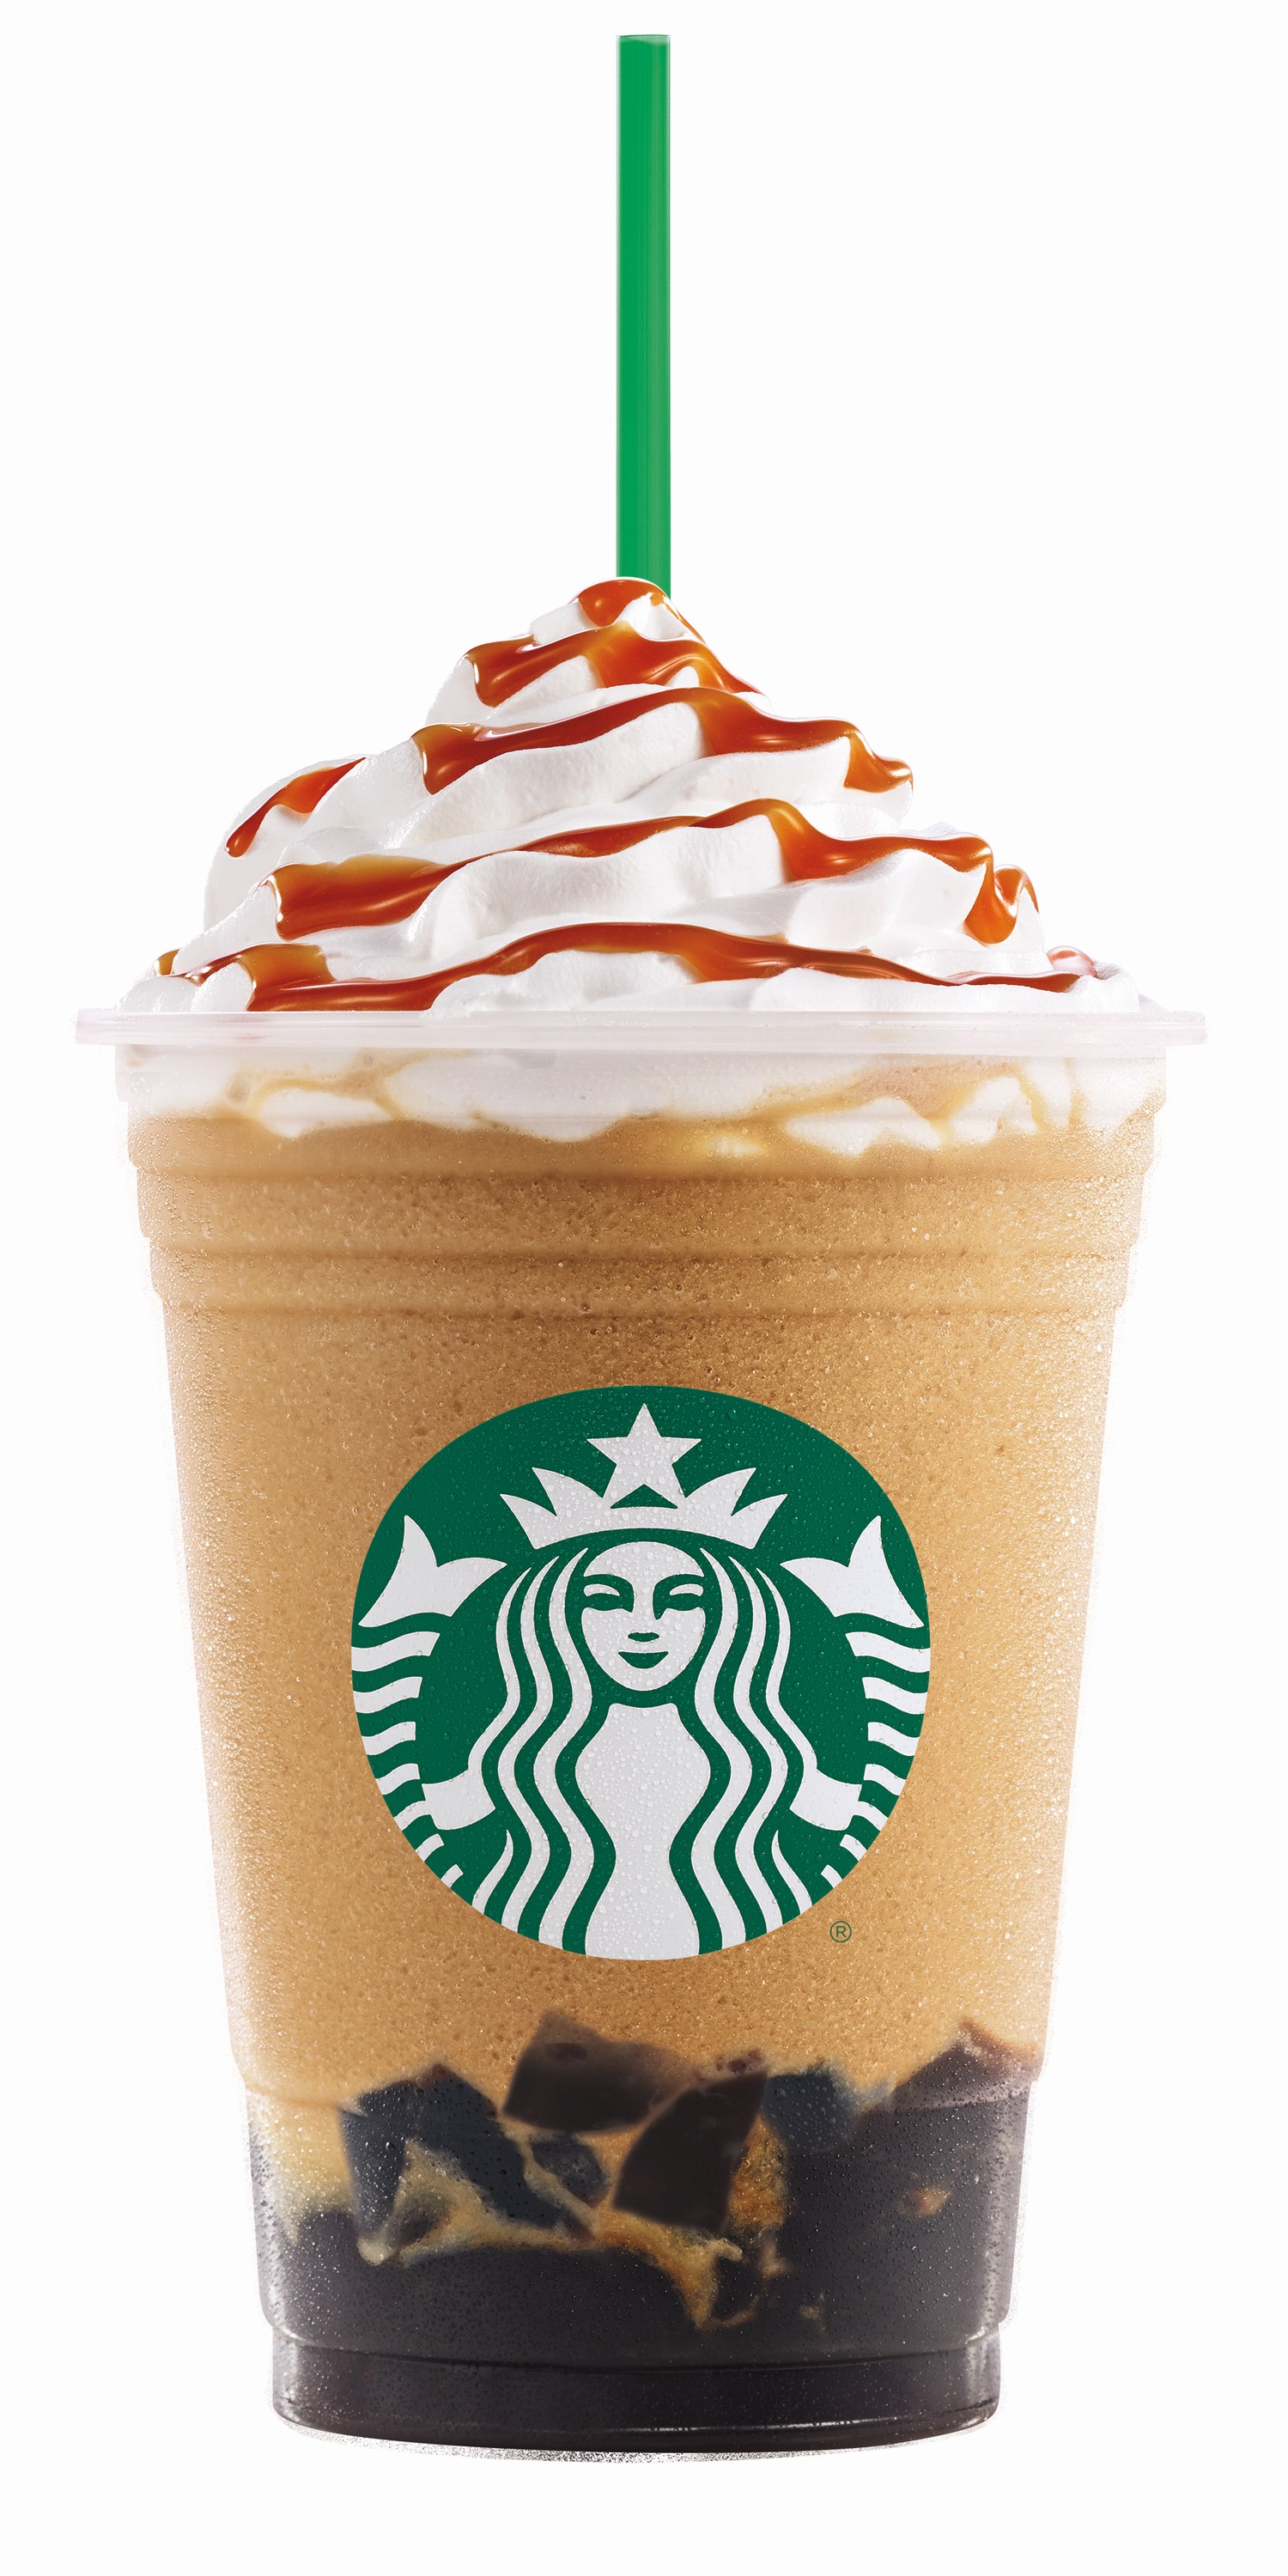 STARBUCKS INTRODUCES UNIQUE FRAPPUCCINO NEWS! Best Communications